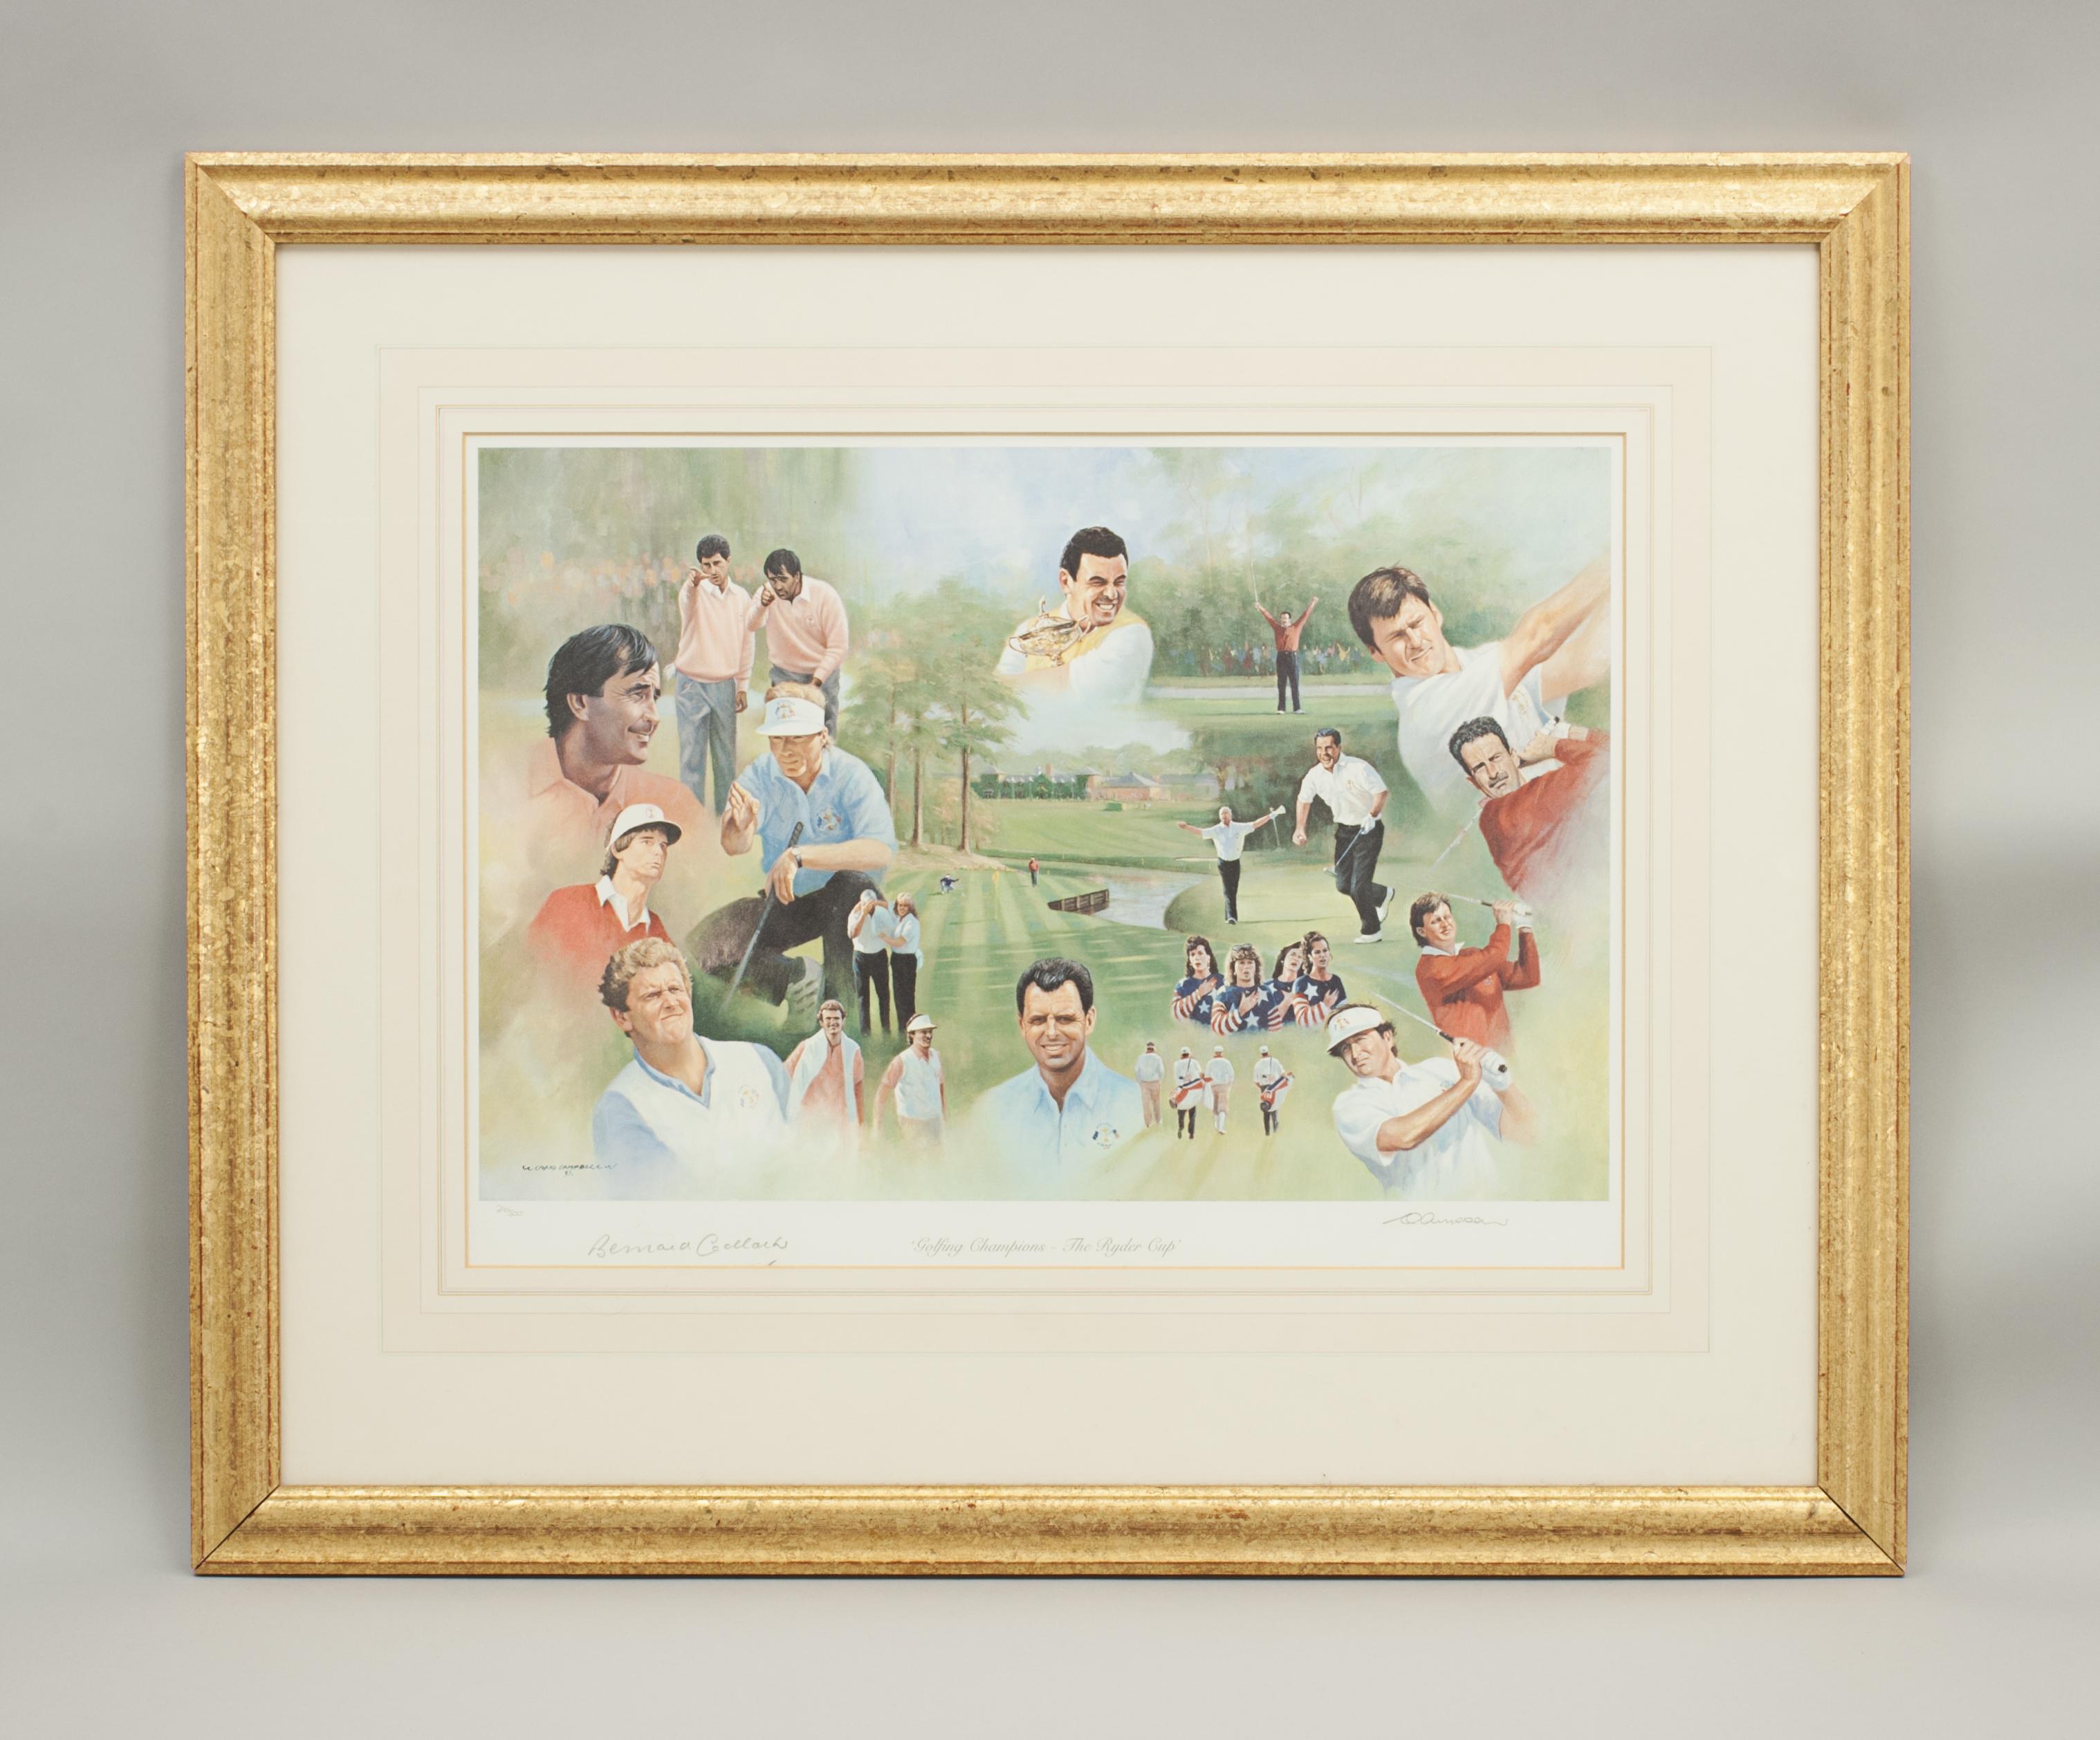 Craig Campbell Golf Champions - The Ryder Cup.
A colourful limited edition golfing print by Craig Campbell entitled 'Golfing Champions - The Ryder Cup'. This is No. 216 of 500 and is signed in pencil by Bernard Gallacher and the artist Craig